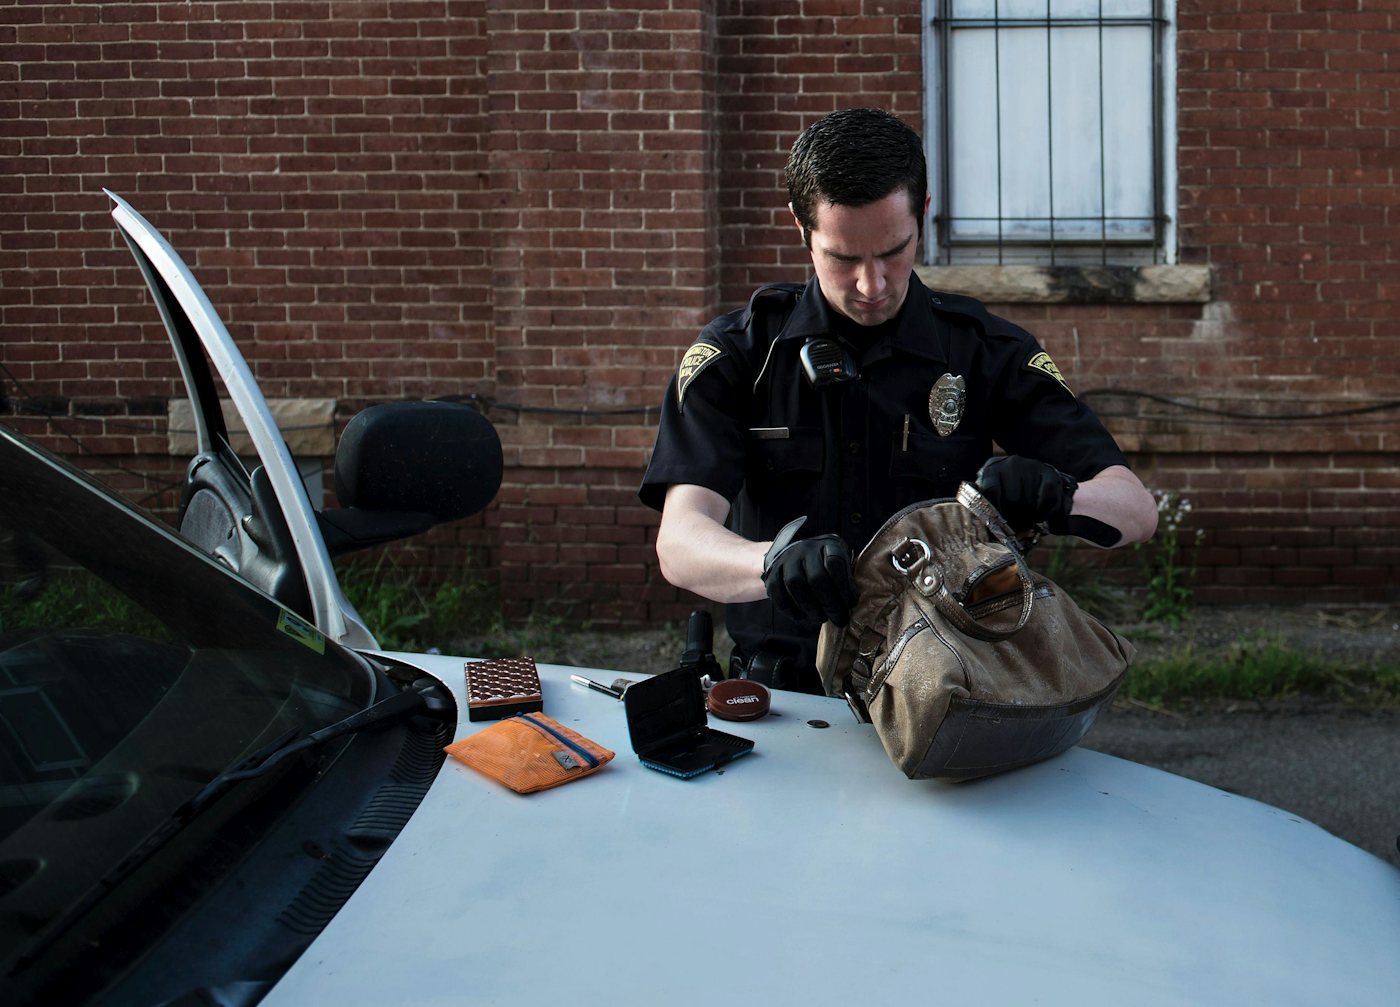 Should Cops Be Allowed to Rip Up Your Stuff While Looking for Drugs? | The New Republic